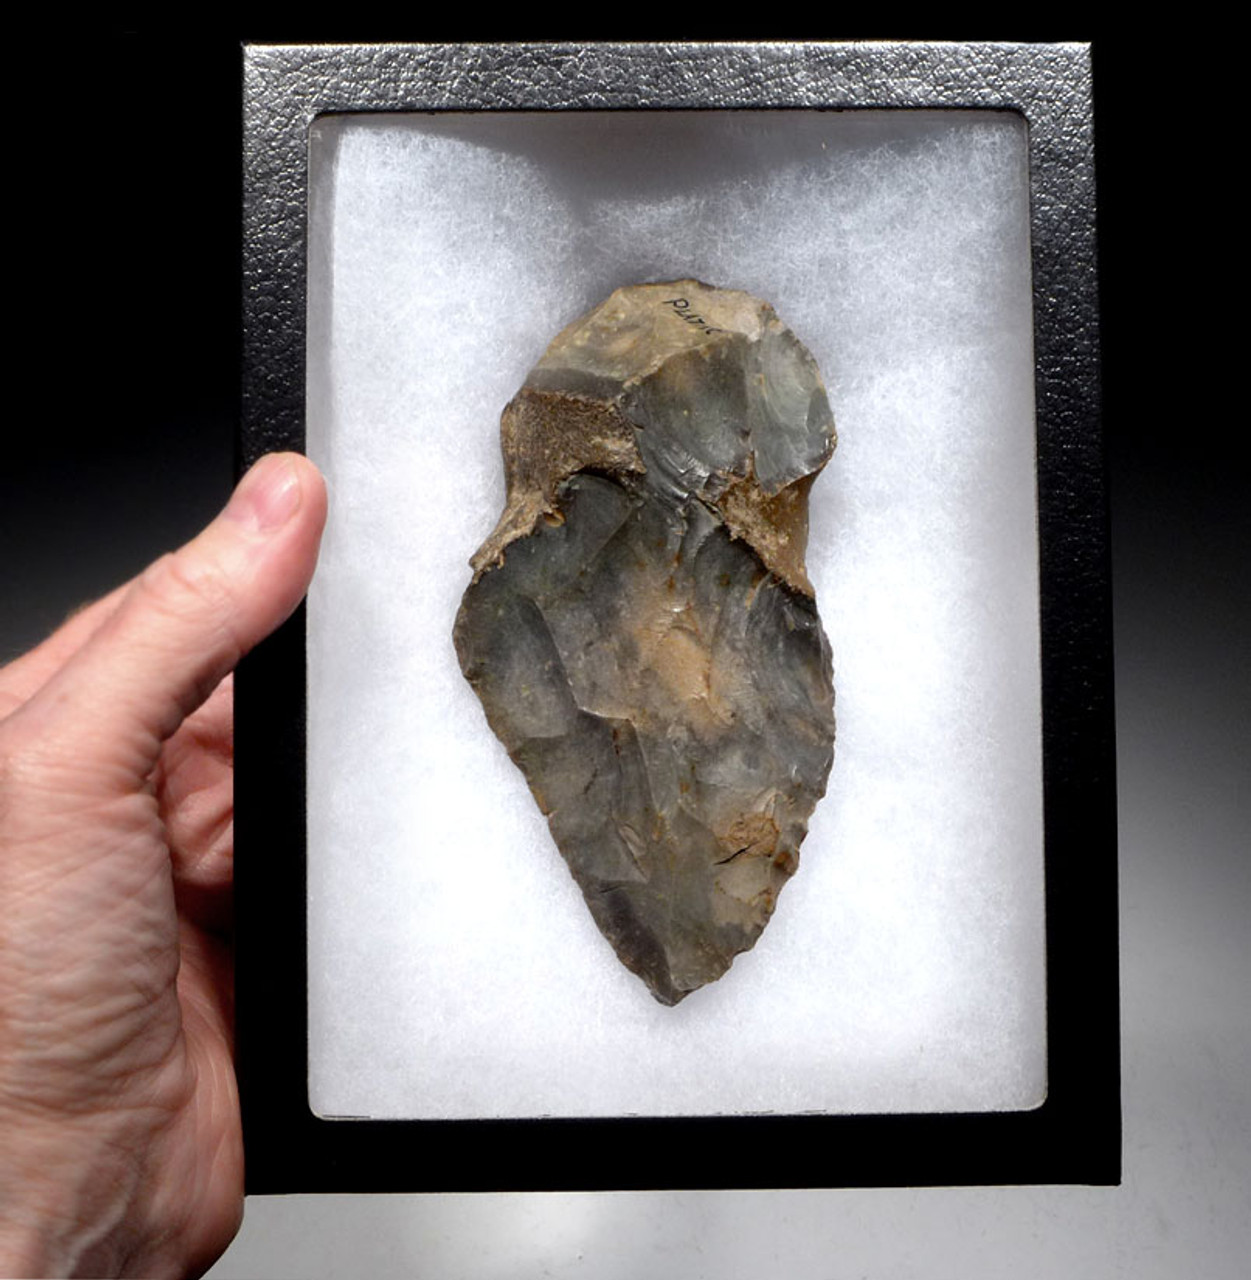 LARGE MUSEUM-CLASS NEANDERTHAL MOUSTERIAN FLINT HAND AXE OF INGENIOUS DESIGN FROM FAMOUS REGION IN FRANCE *M381